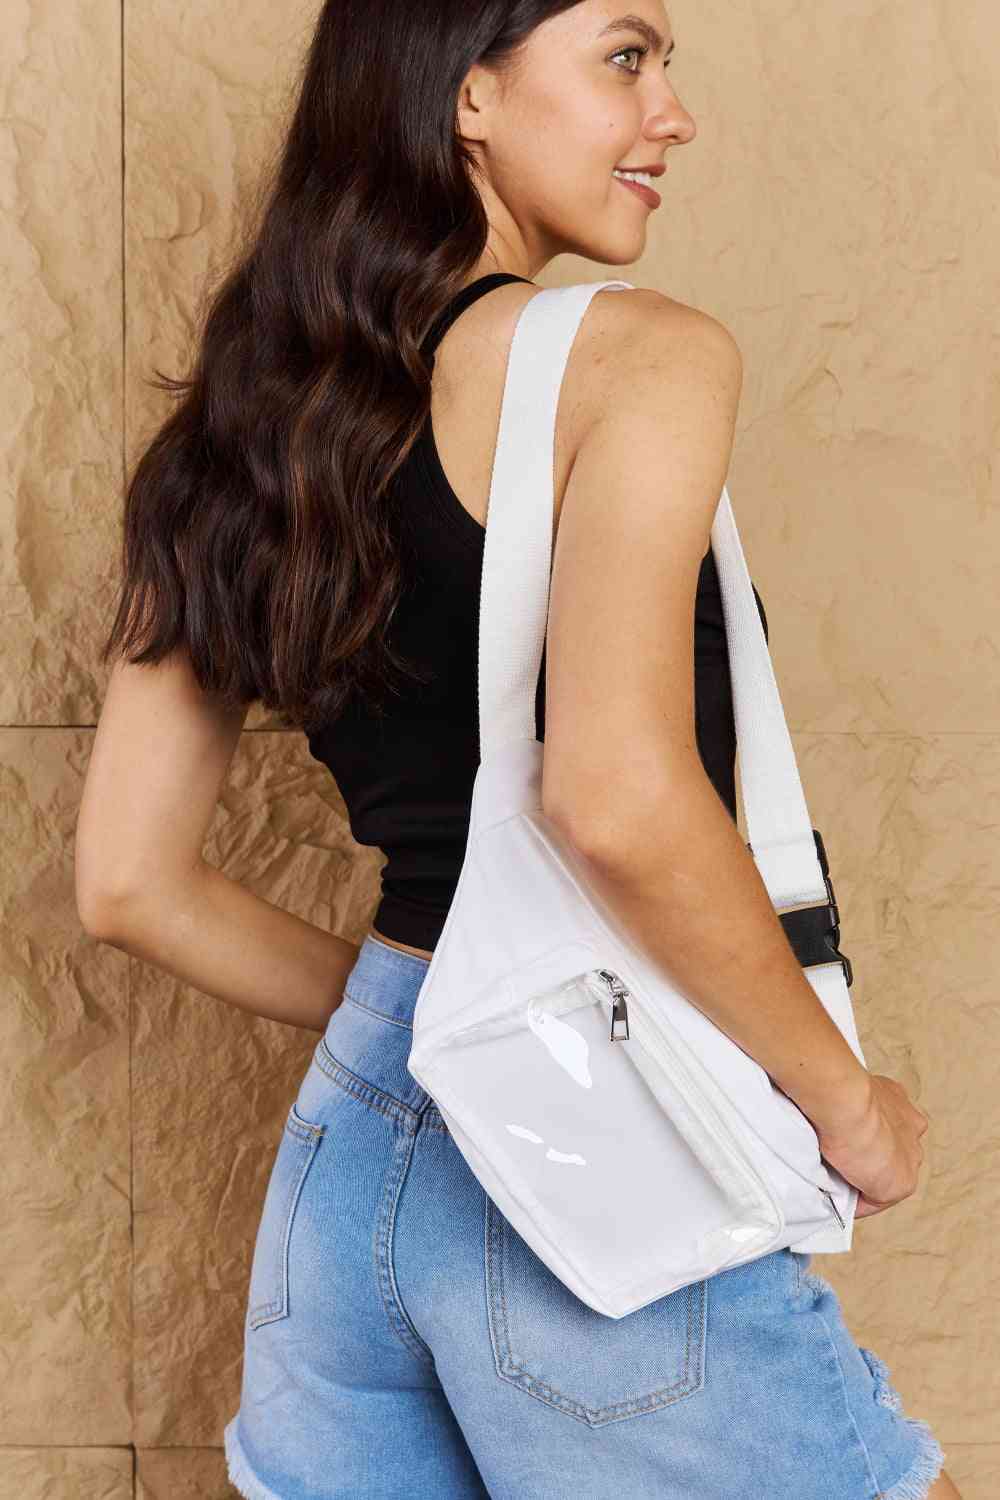 White Fanny Pack Crossbody with Clear Zipper Pouch